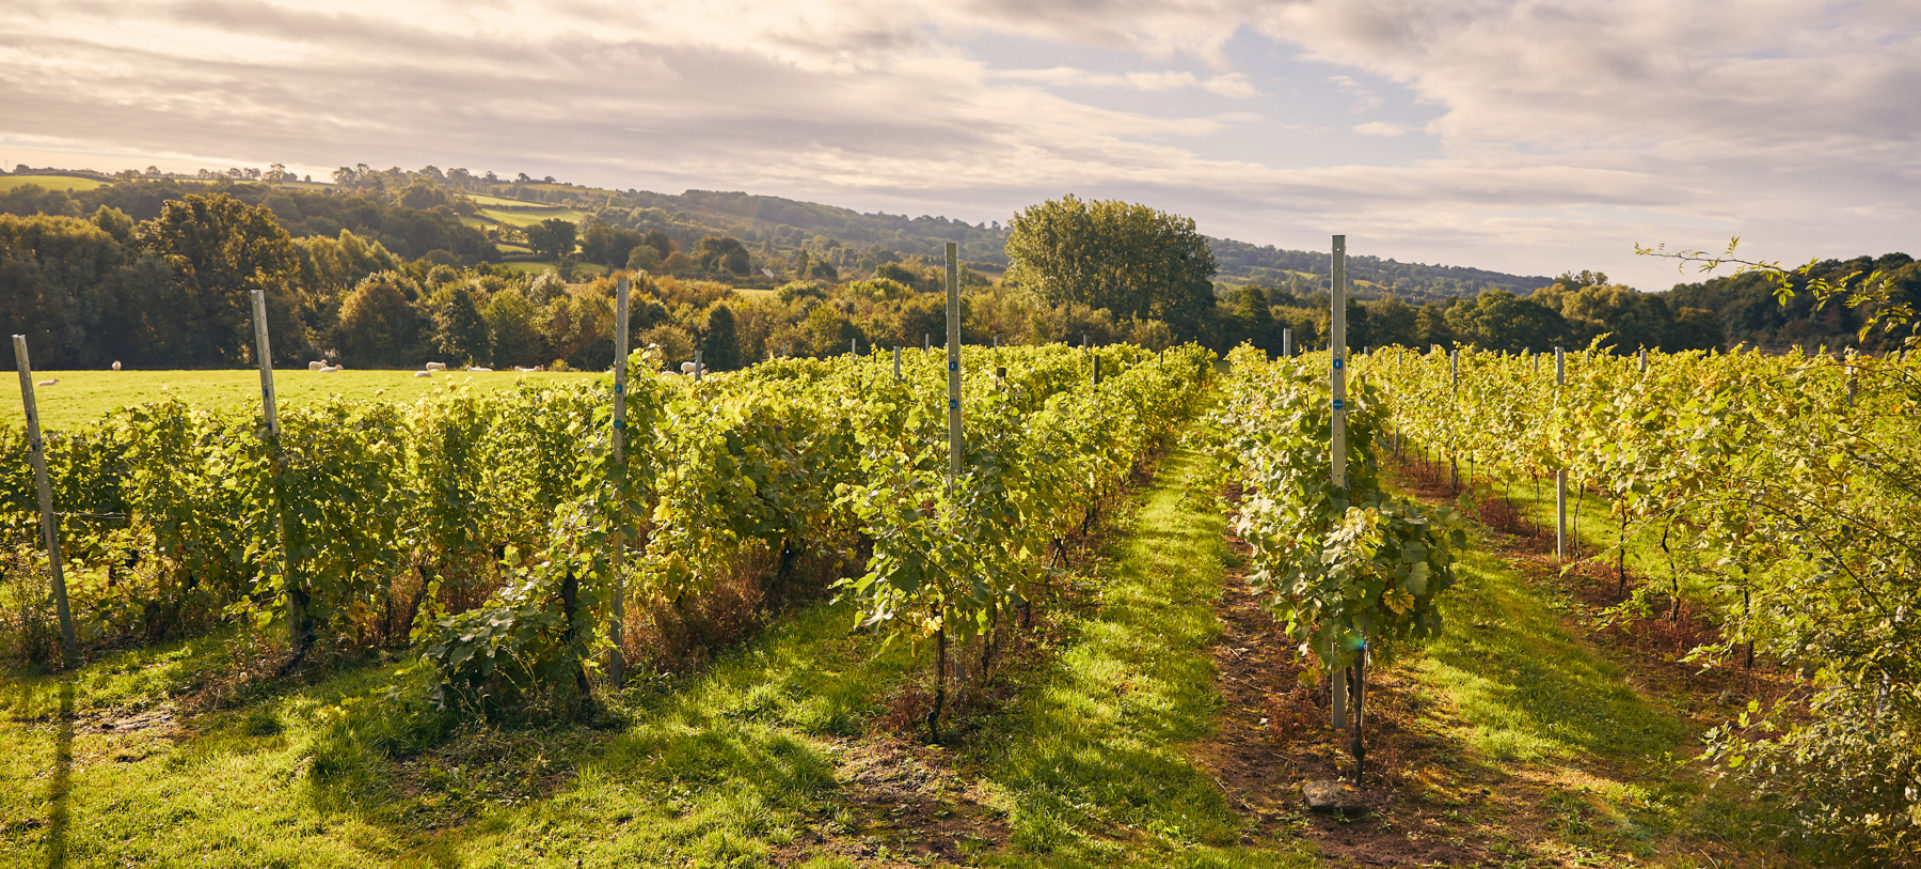 Frome Valley Vineyard